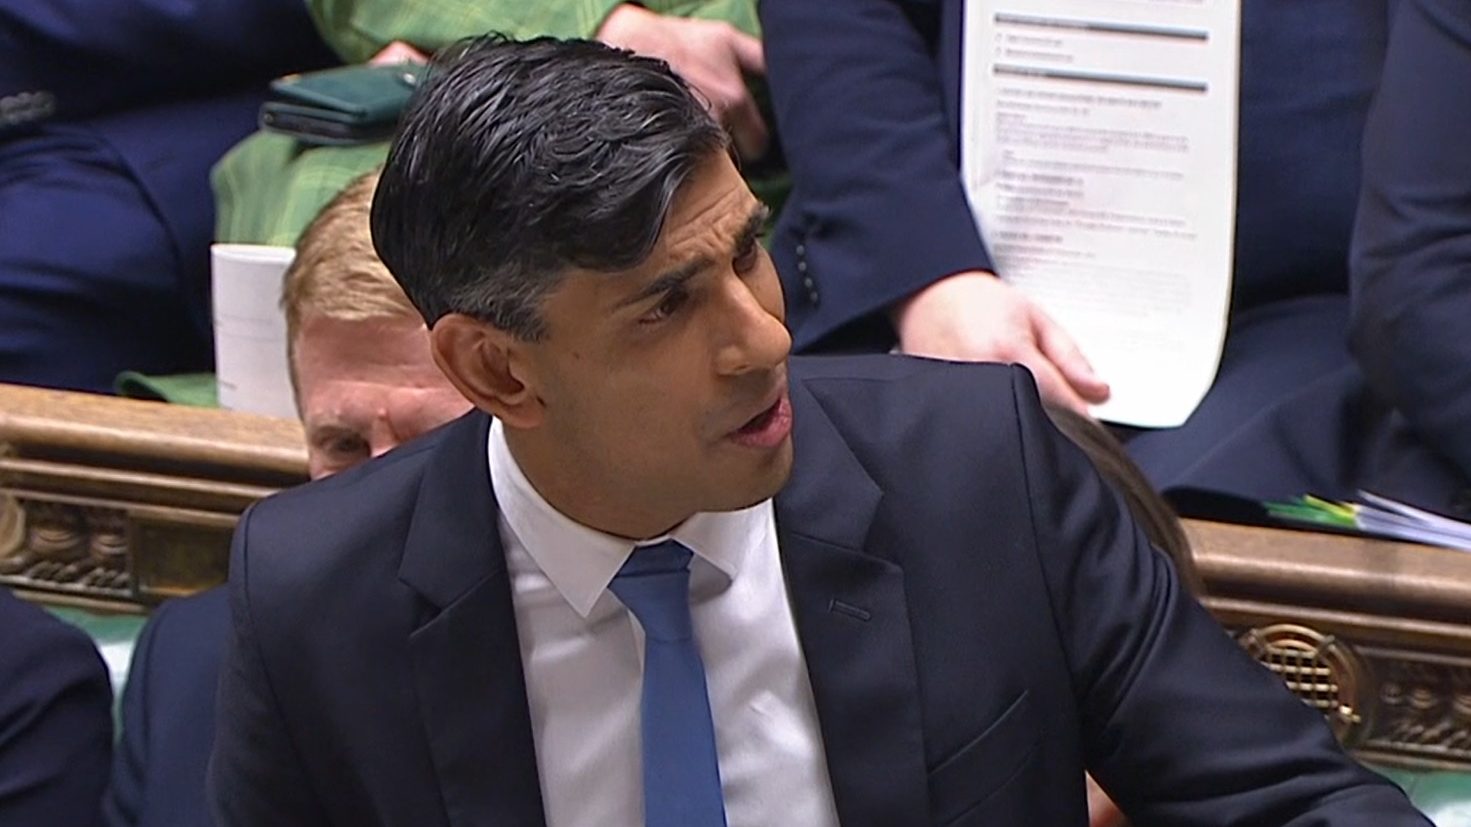 Rishi Sunak at prime minister's questions. Pic: Parliament